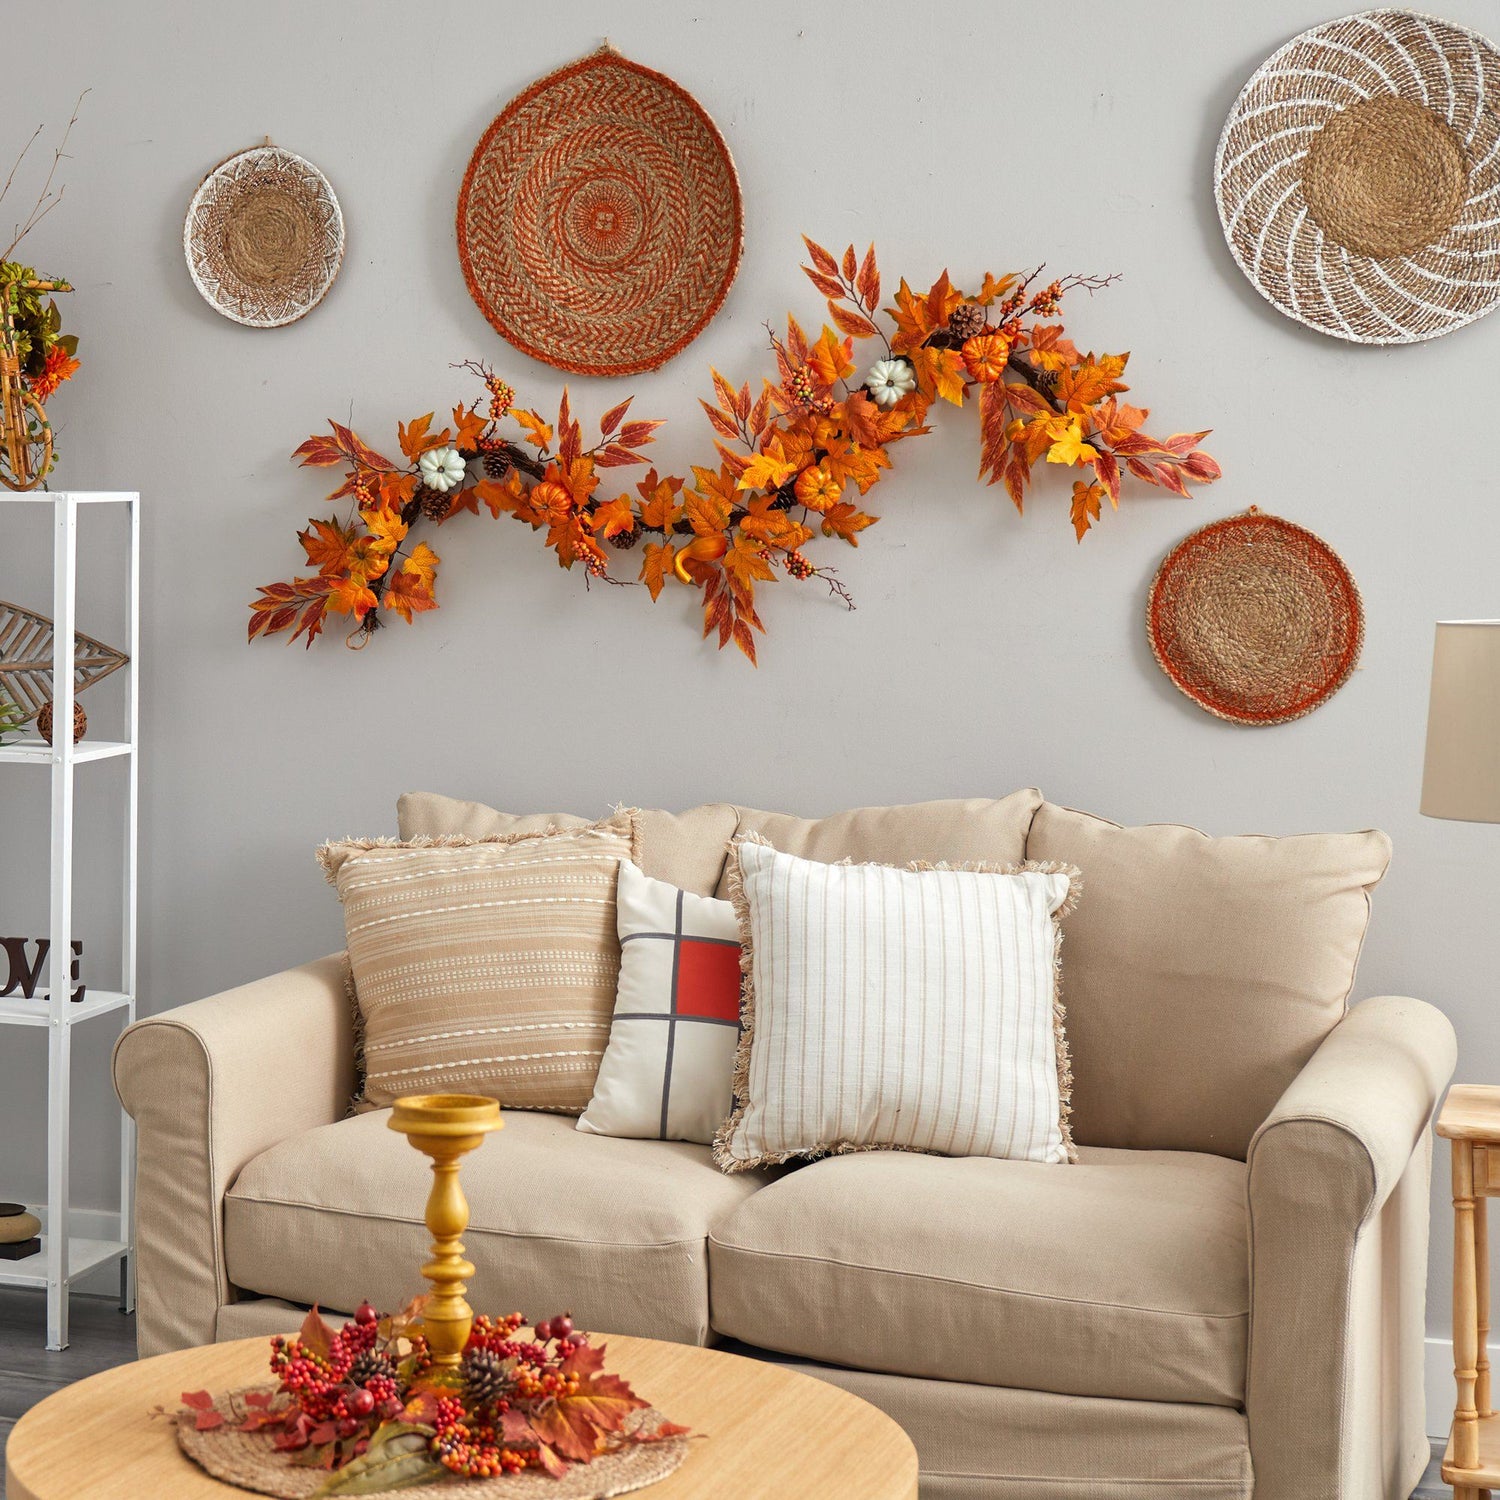 6’ Assorted Autumn Maple Leaves, Pumpkins, Gourds, Berries and Pinecone Artificial Fall Garland